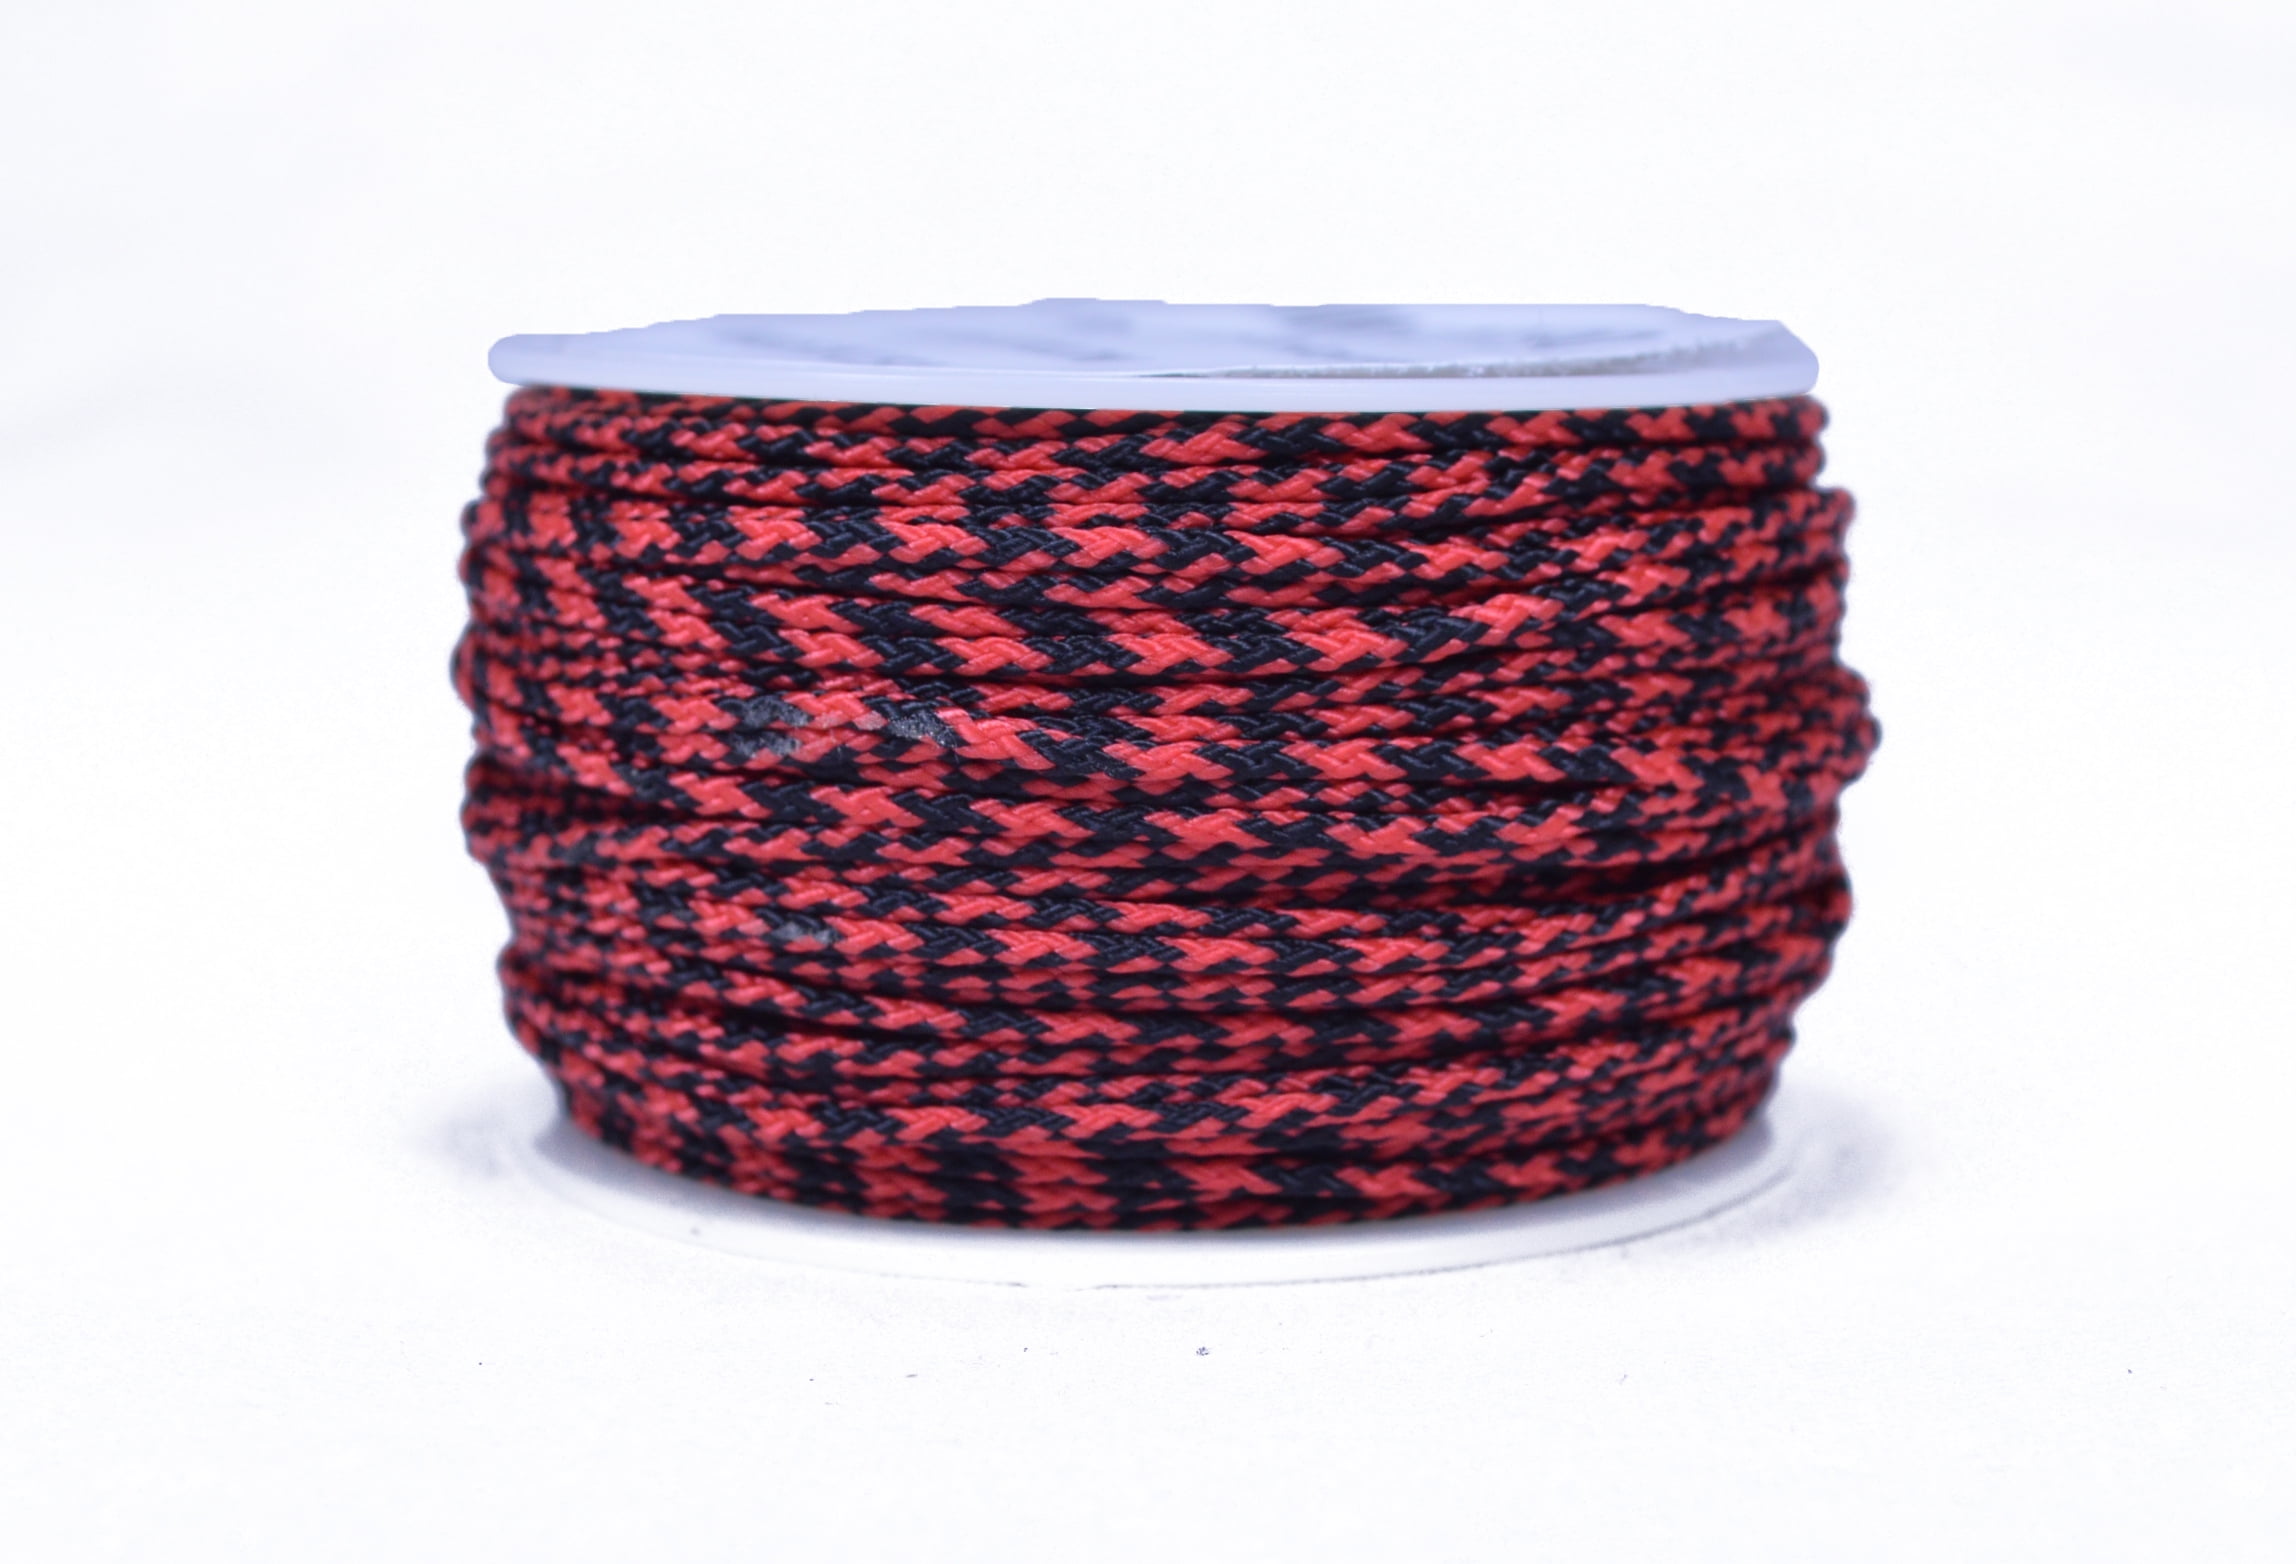 Micro Cord Tactical Braided Paracord Maroon